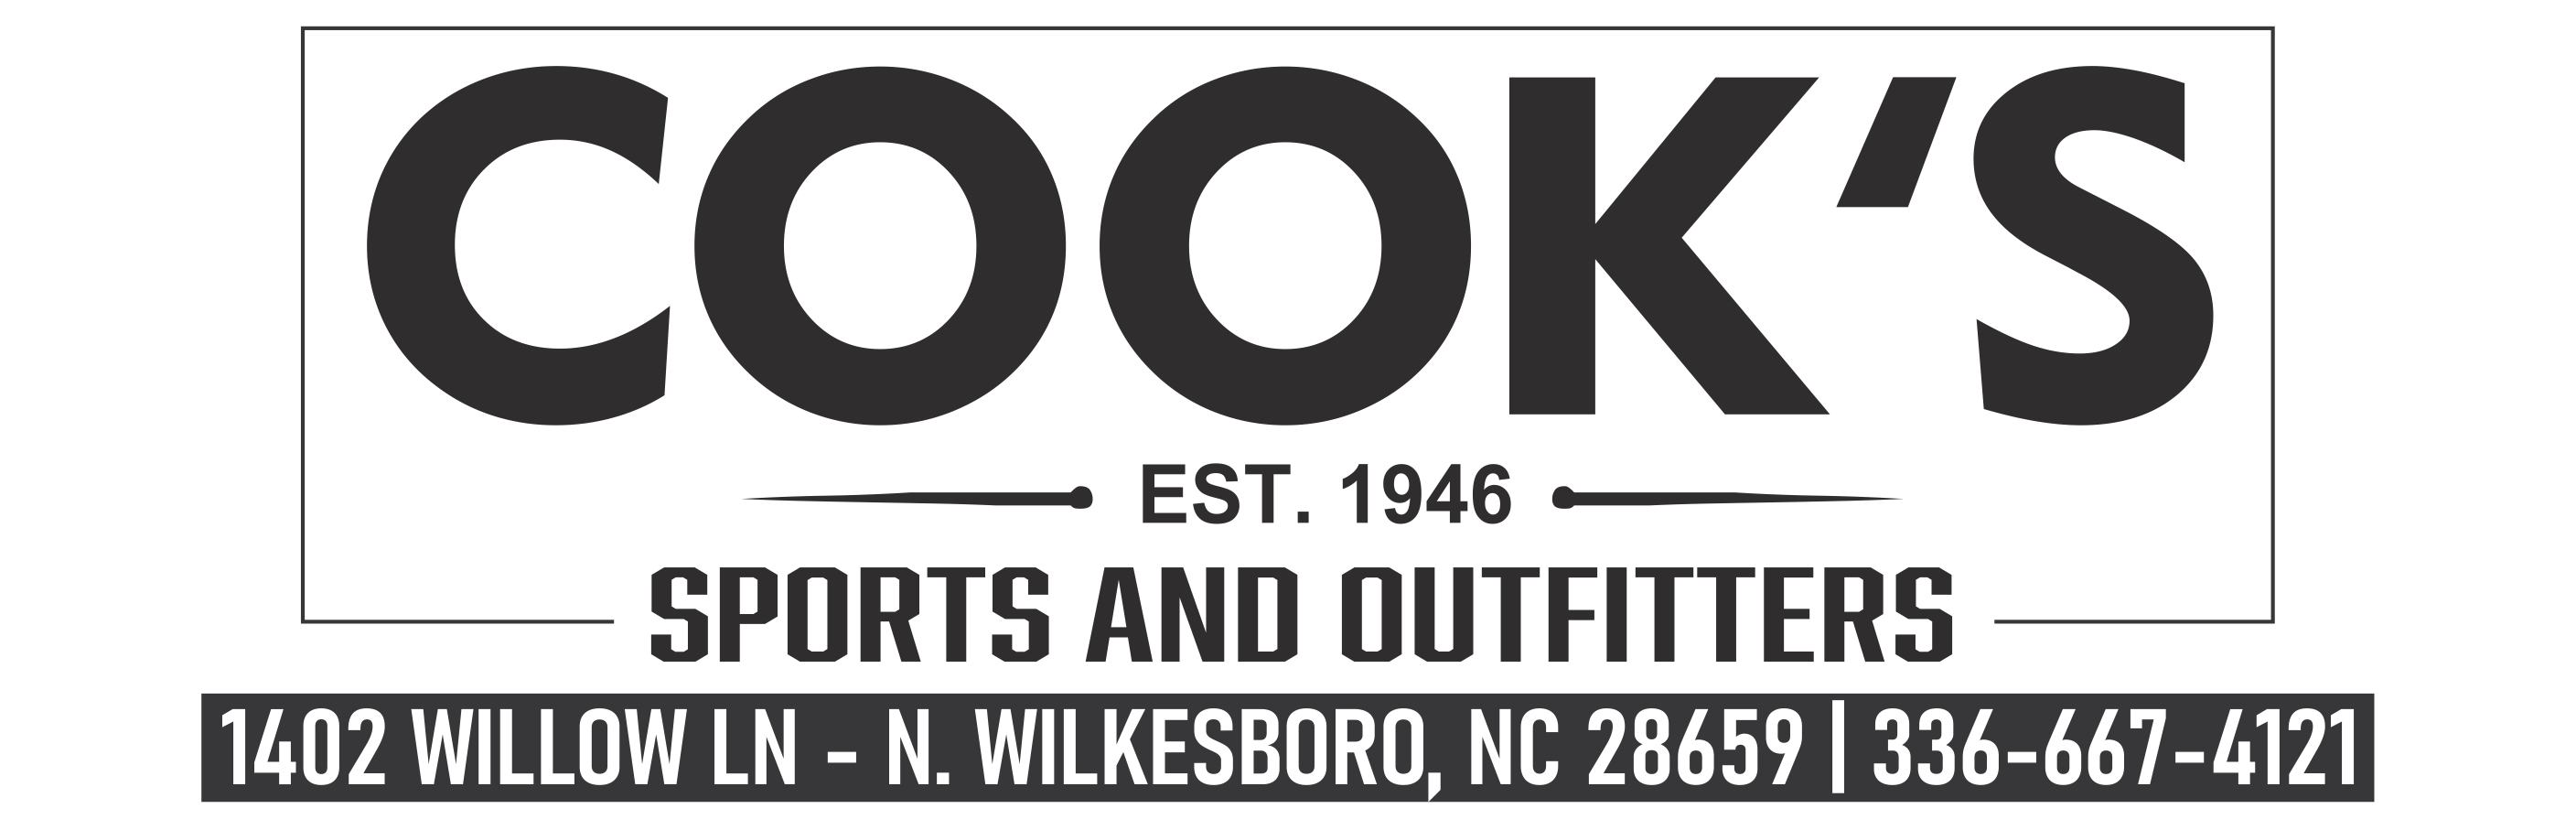 https://www.cookssports.com/ccms/default/assets/Image/cooks%20logos%20sports%20outfitters(1).png